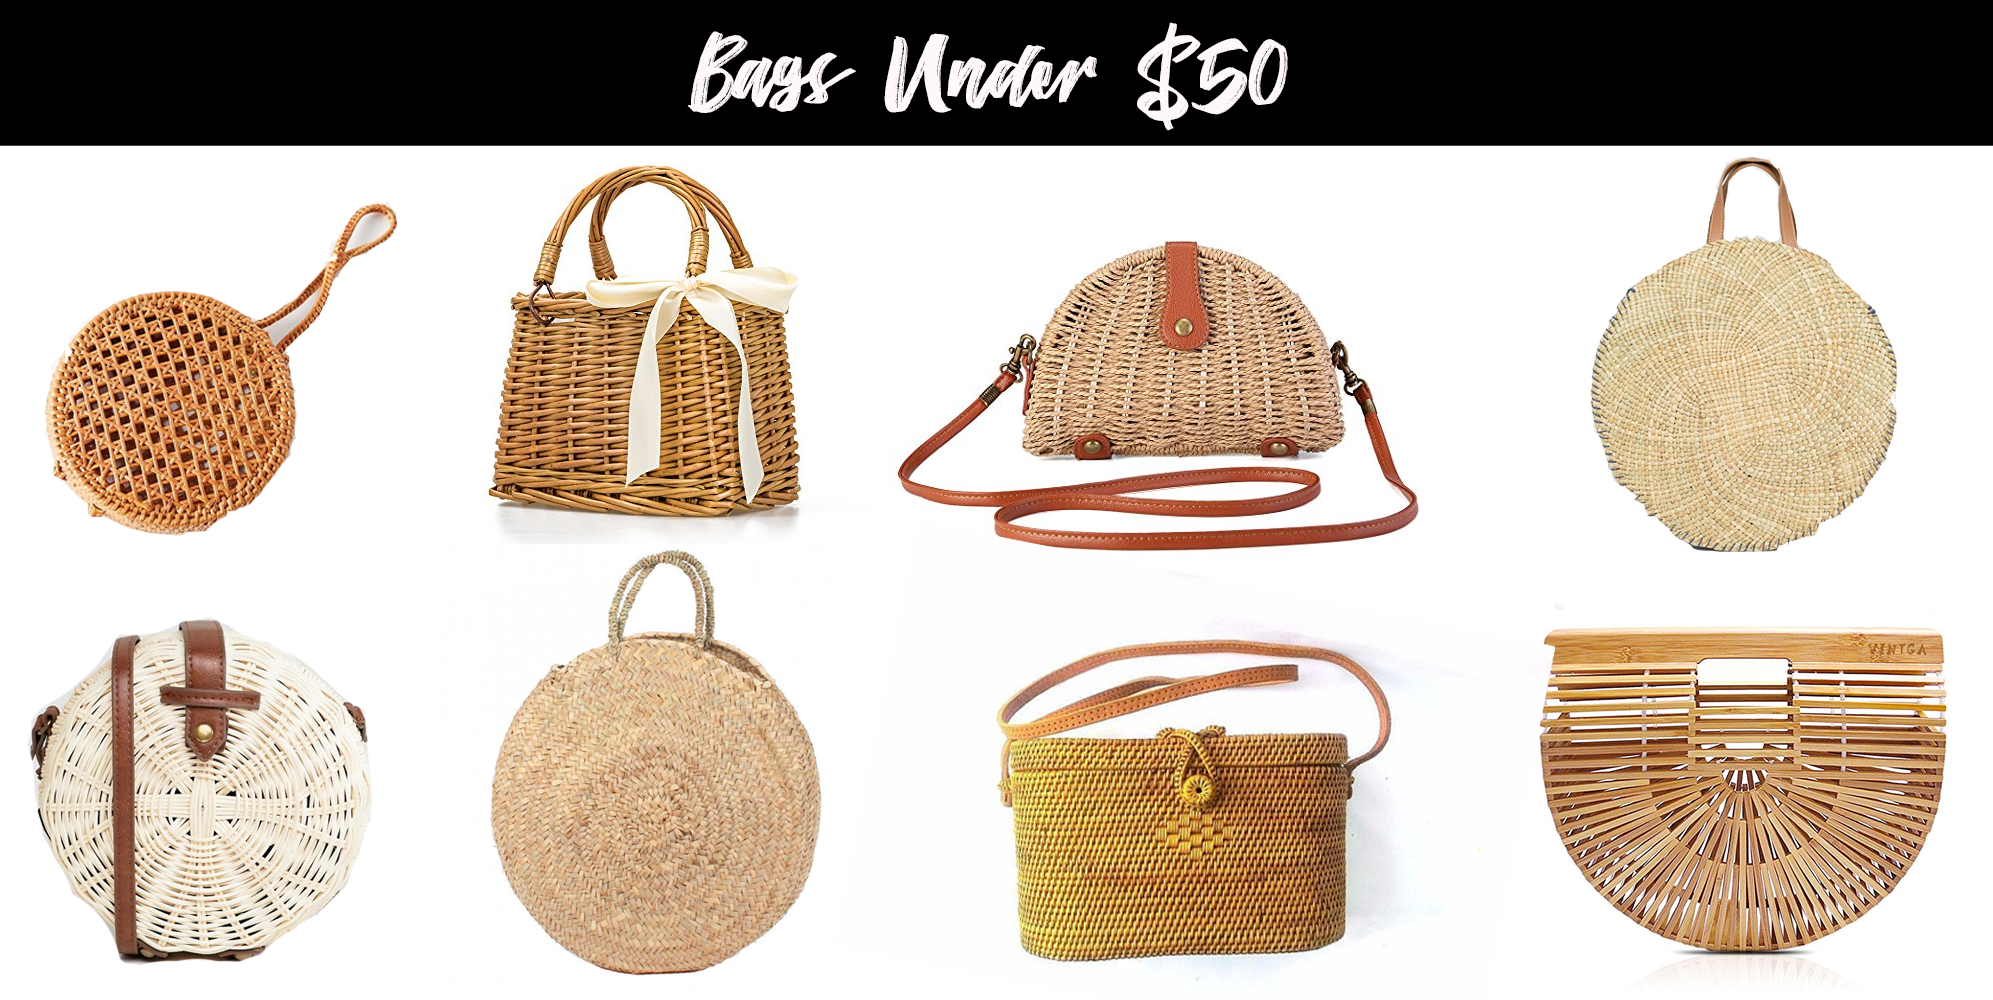 Summer Straw and Bamboo bags under $50